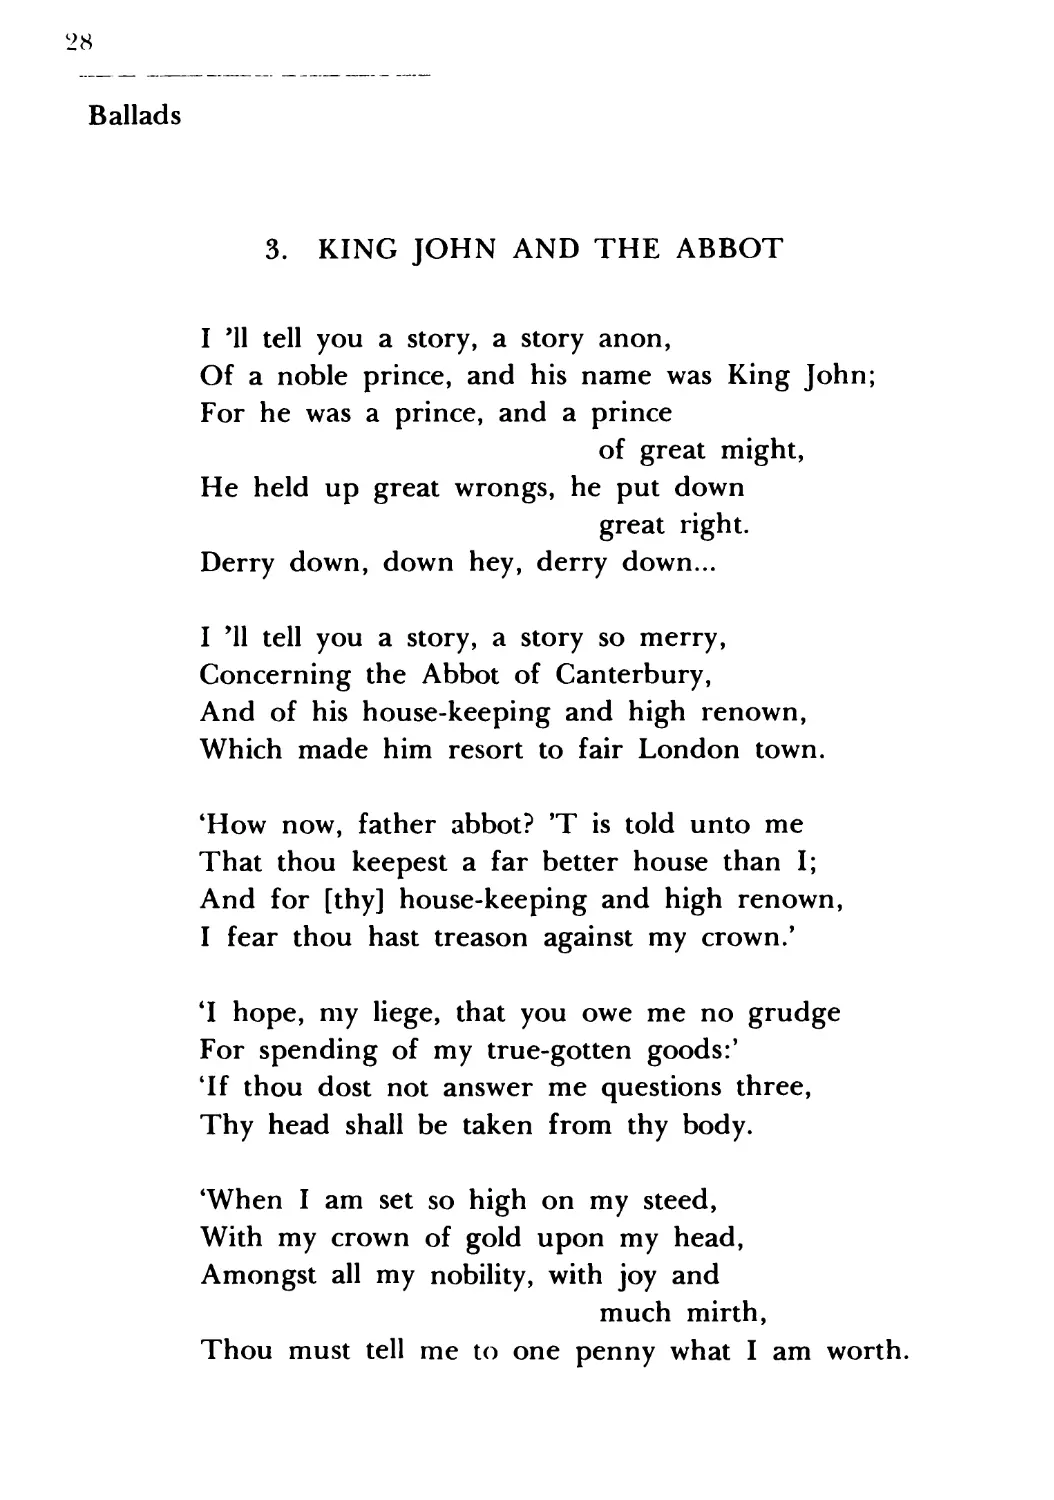 3. King John and the Abbot